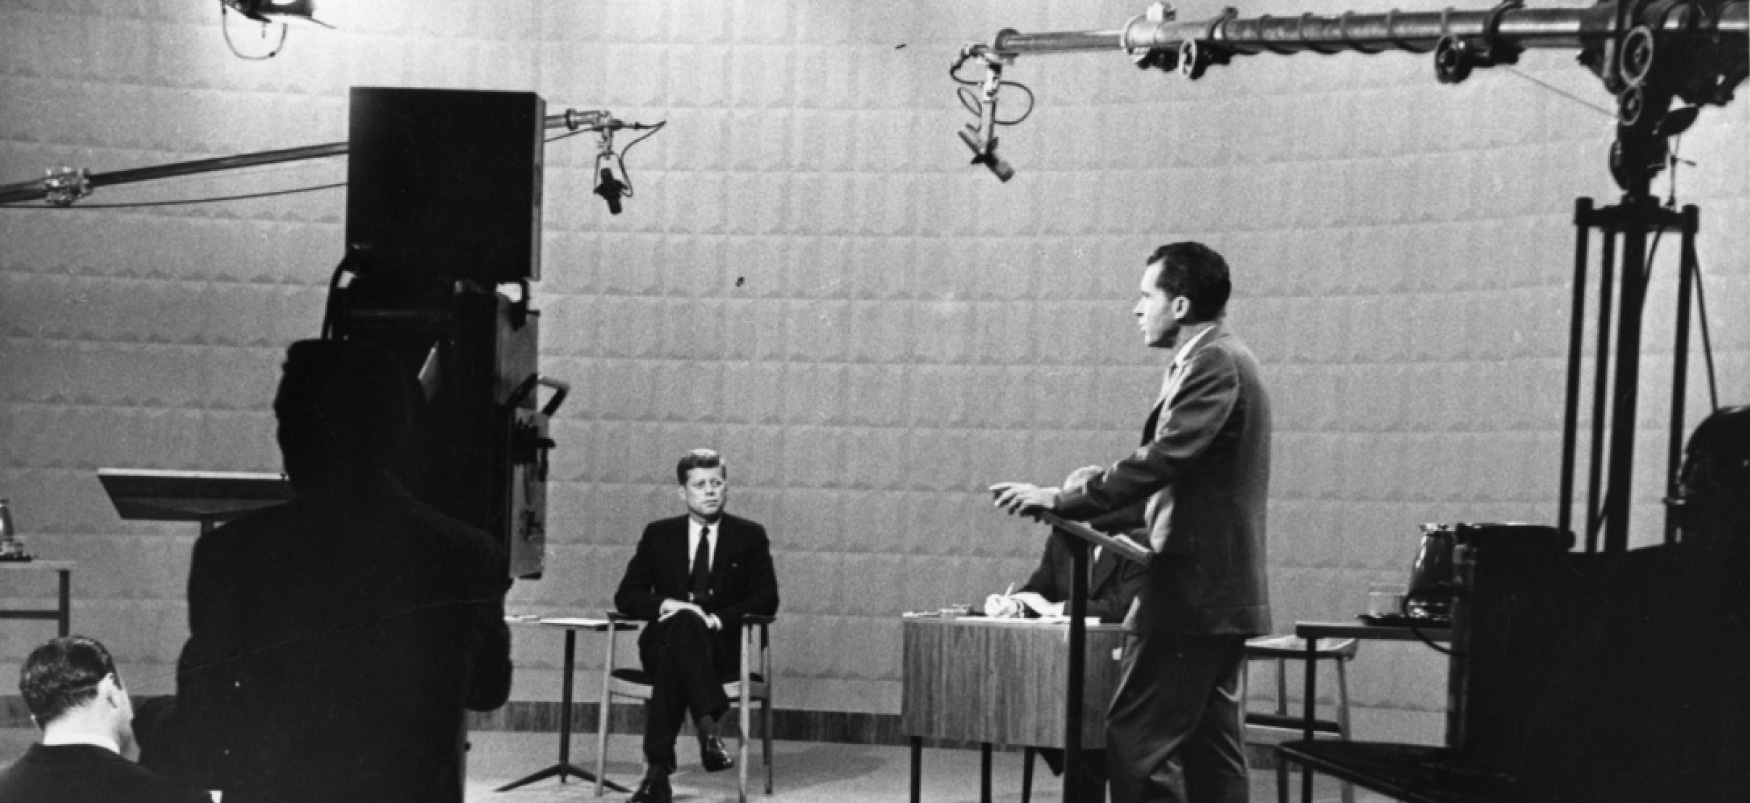 Republican Vice President Richard Nixon stands at a podium on a soundstage, facing a television camera, with microphones visible above his head. His seated opponent, Democratic Senator John F. Kennedy, looks on.